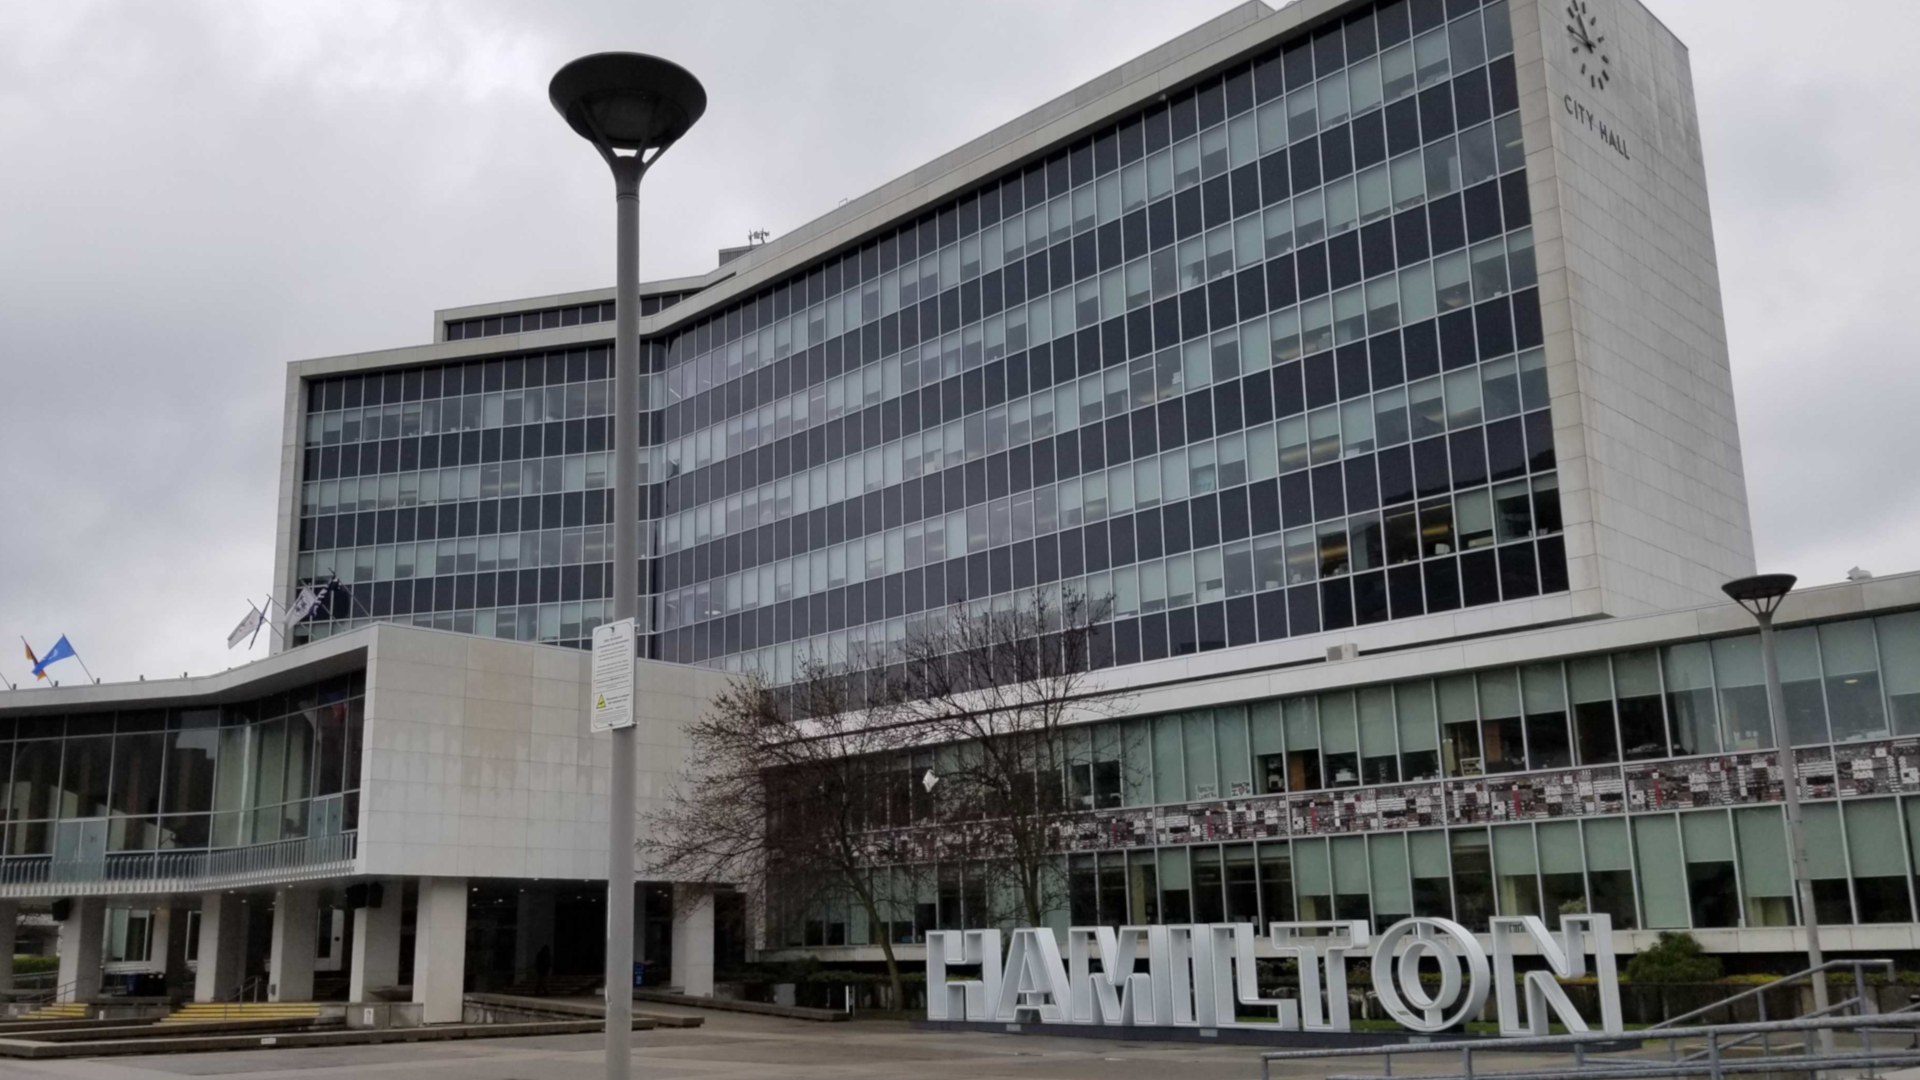 ‘Too early’ to assess impact of cybersecurity breach, City of Hamilton says